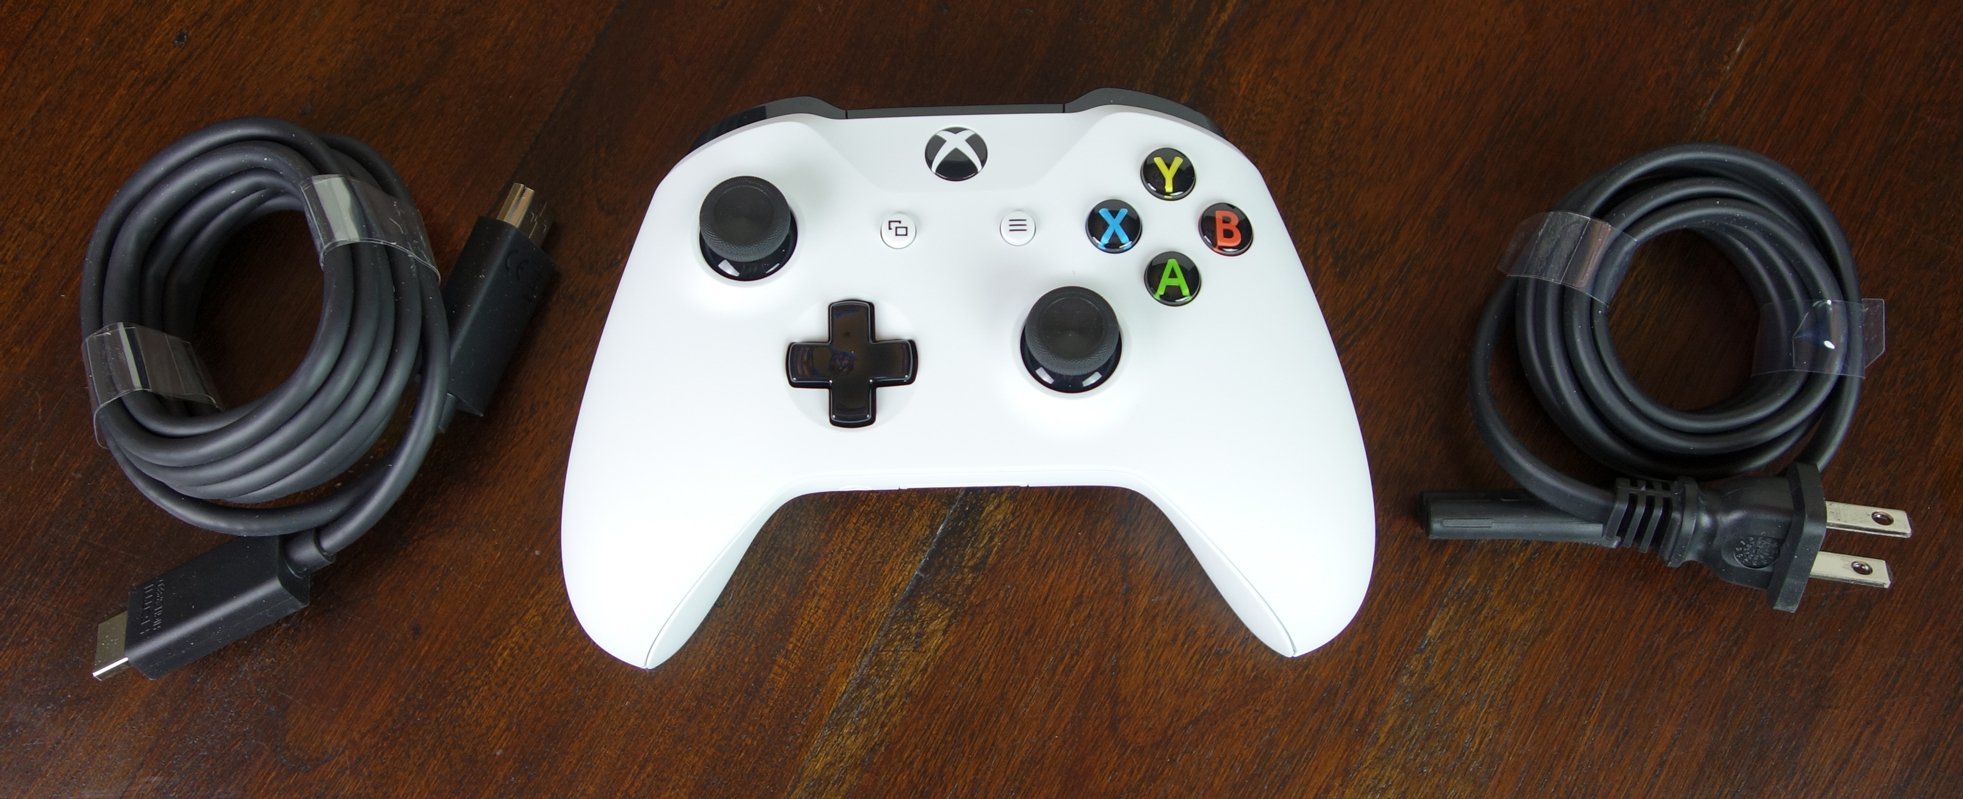 Xbox One S Controller, cables